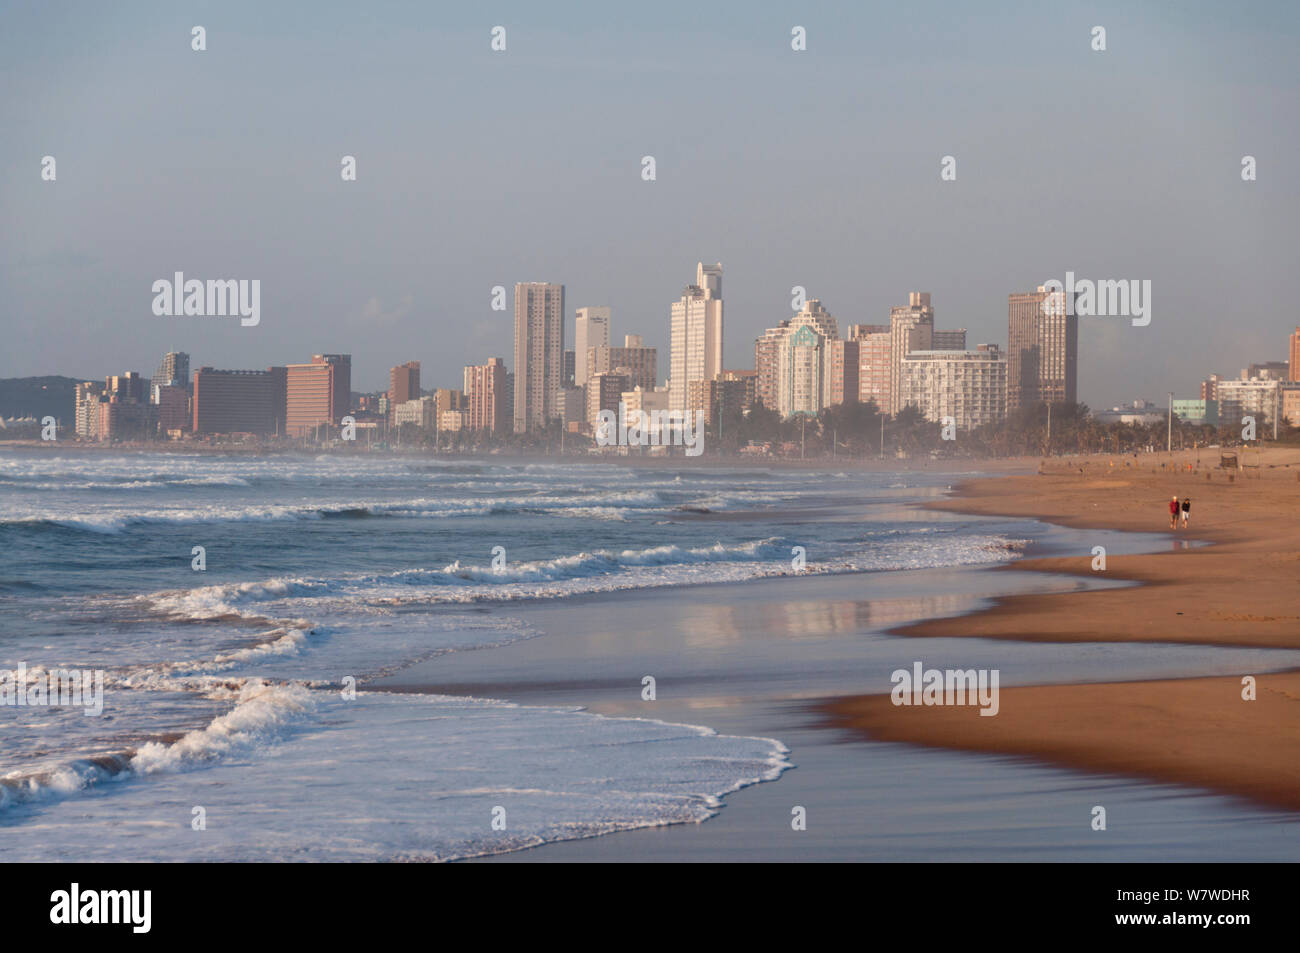 Durban beach with city skyscrapers in the distance, KwaZulu Natal, South Africa, August 2009. Stock Photo